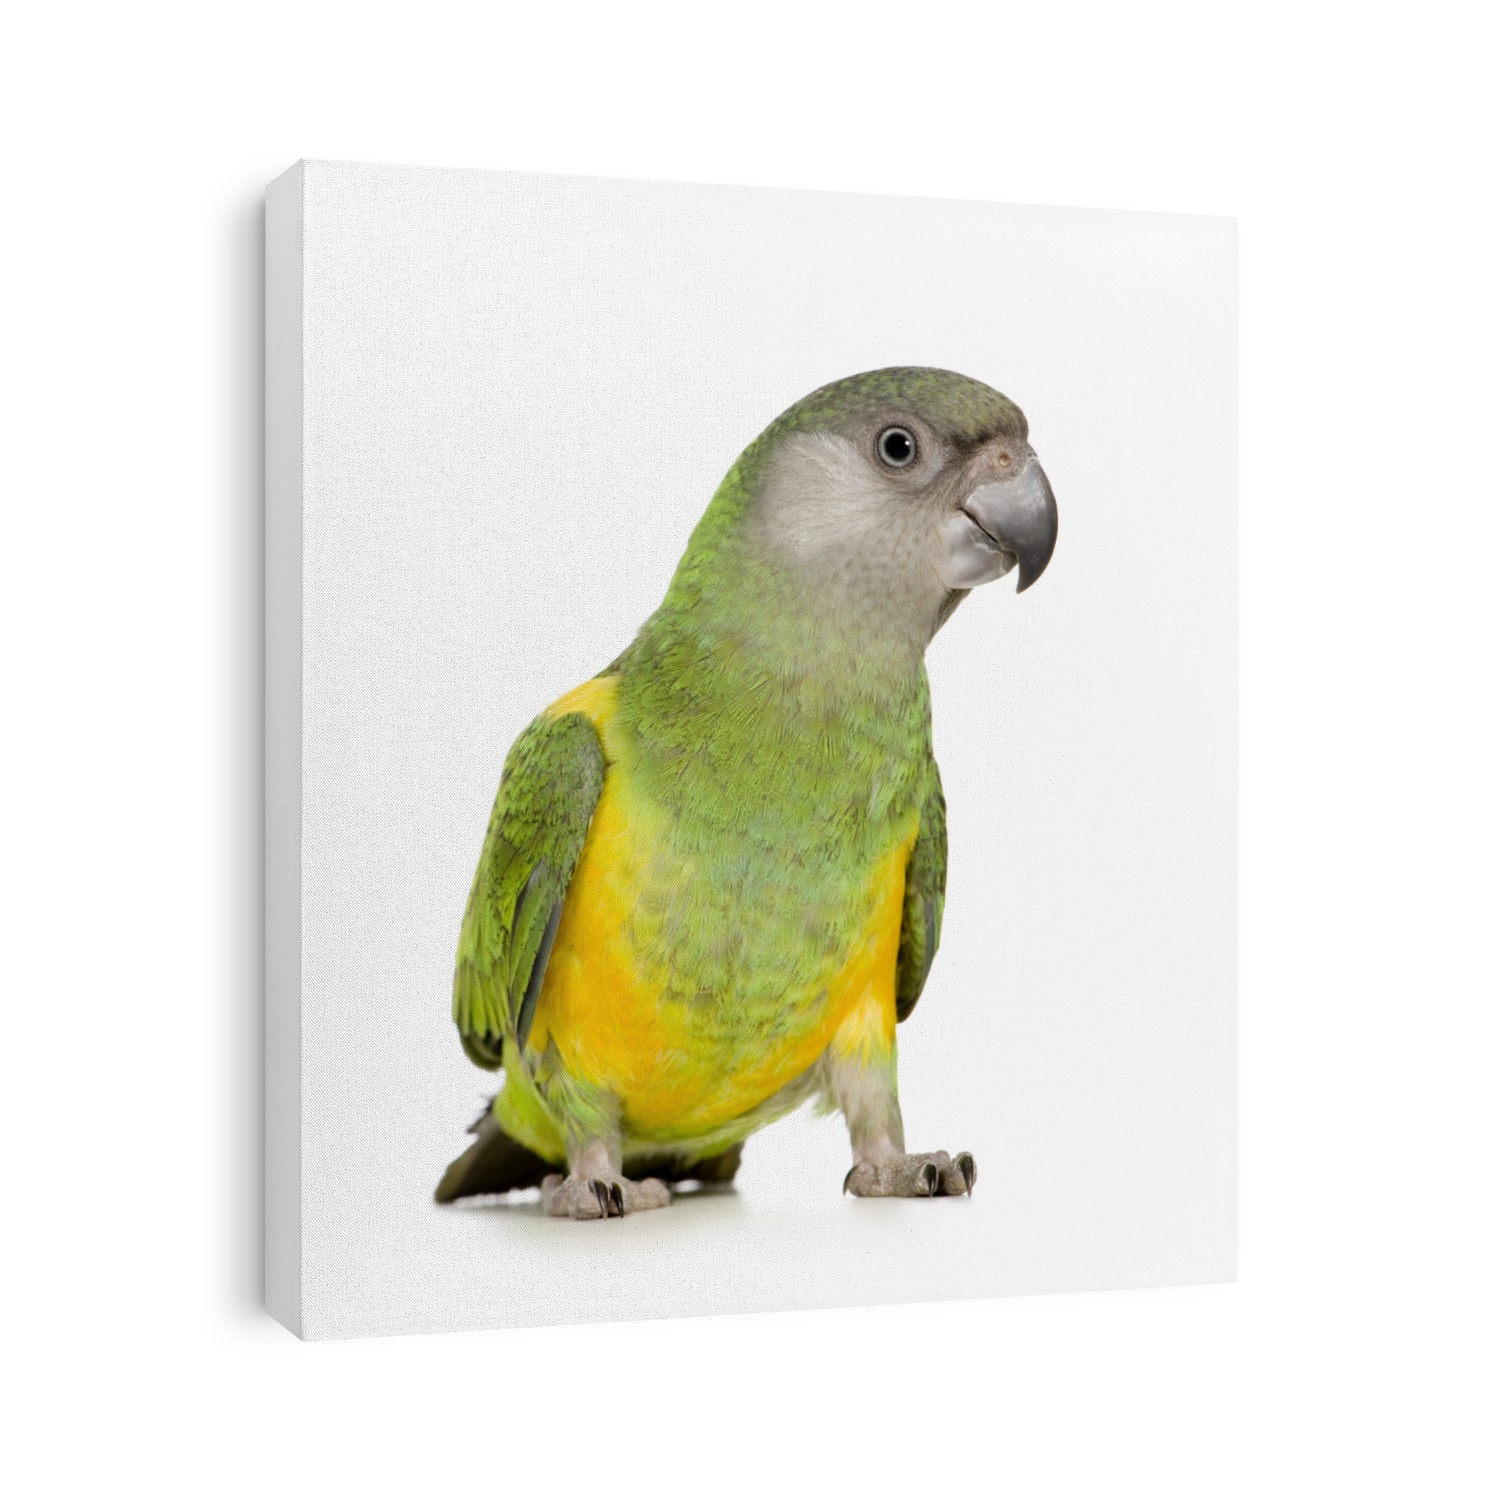 Senegal Parrot - Poicephalus senegalus in front of a white background